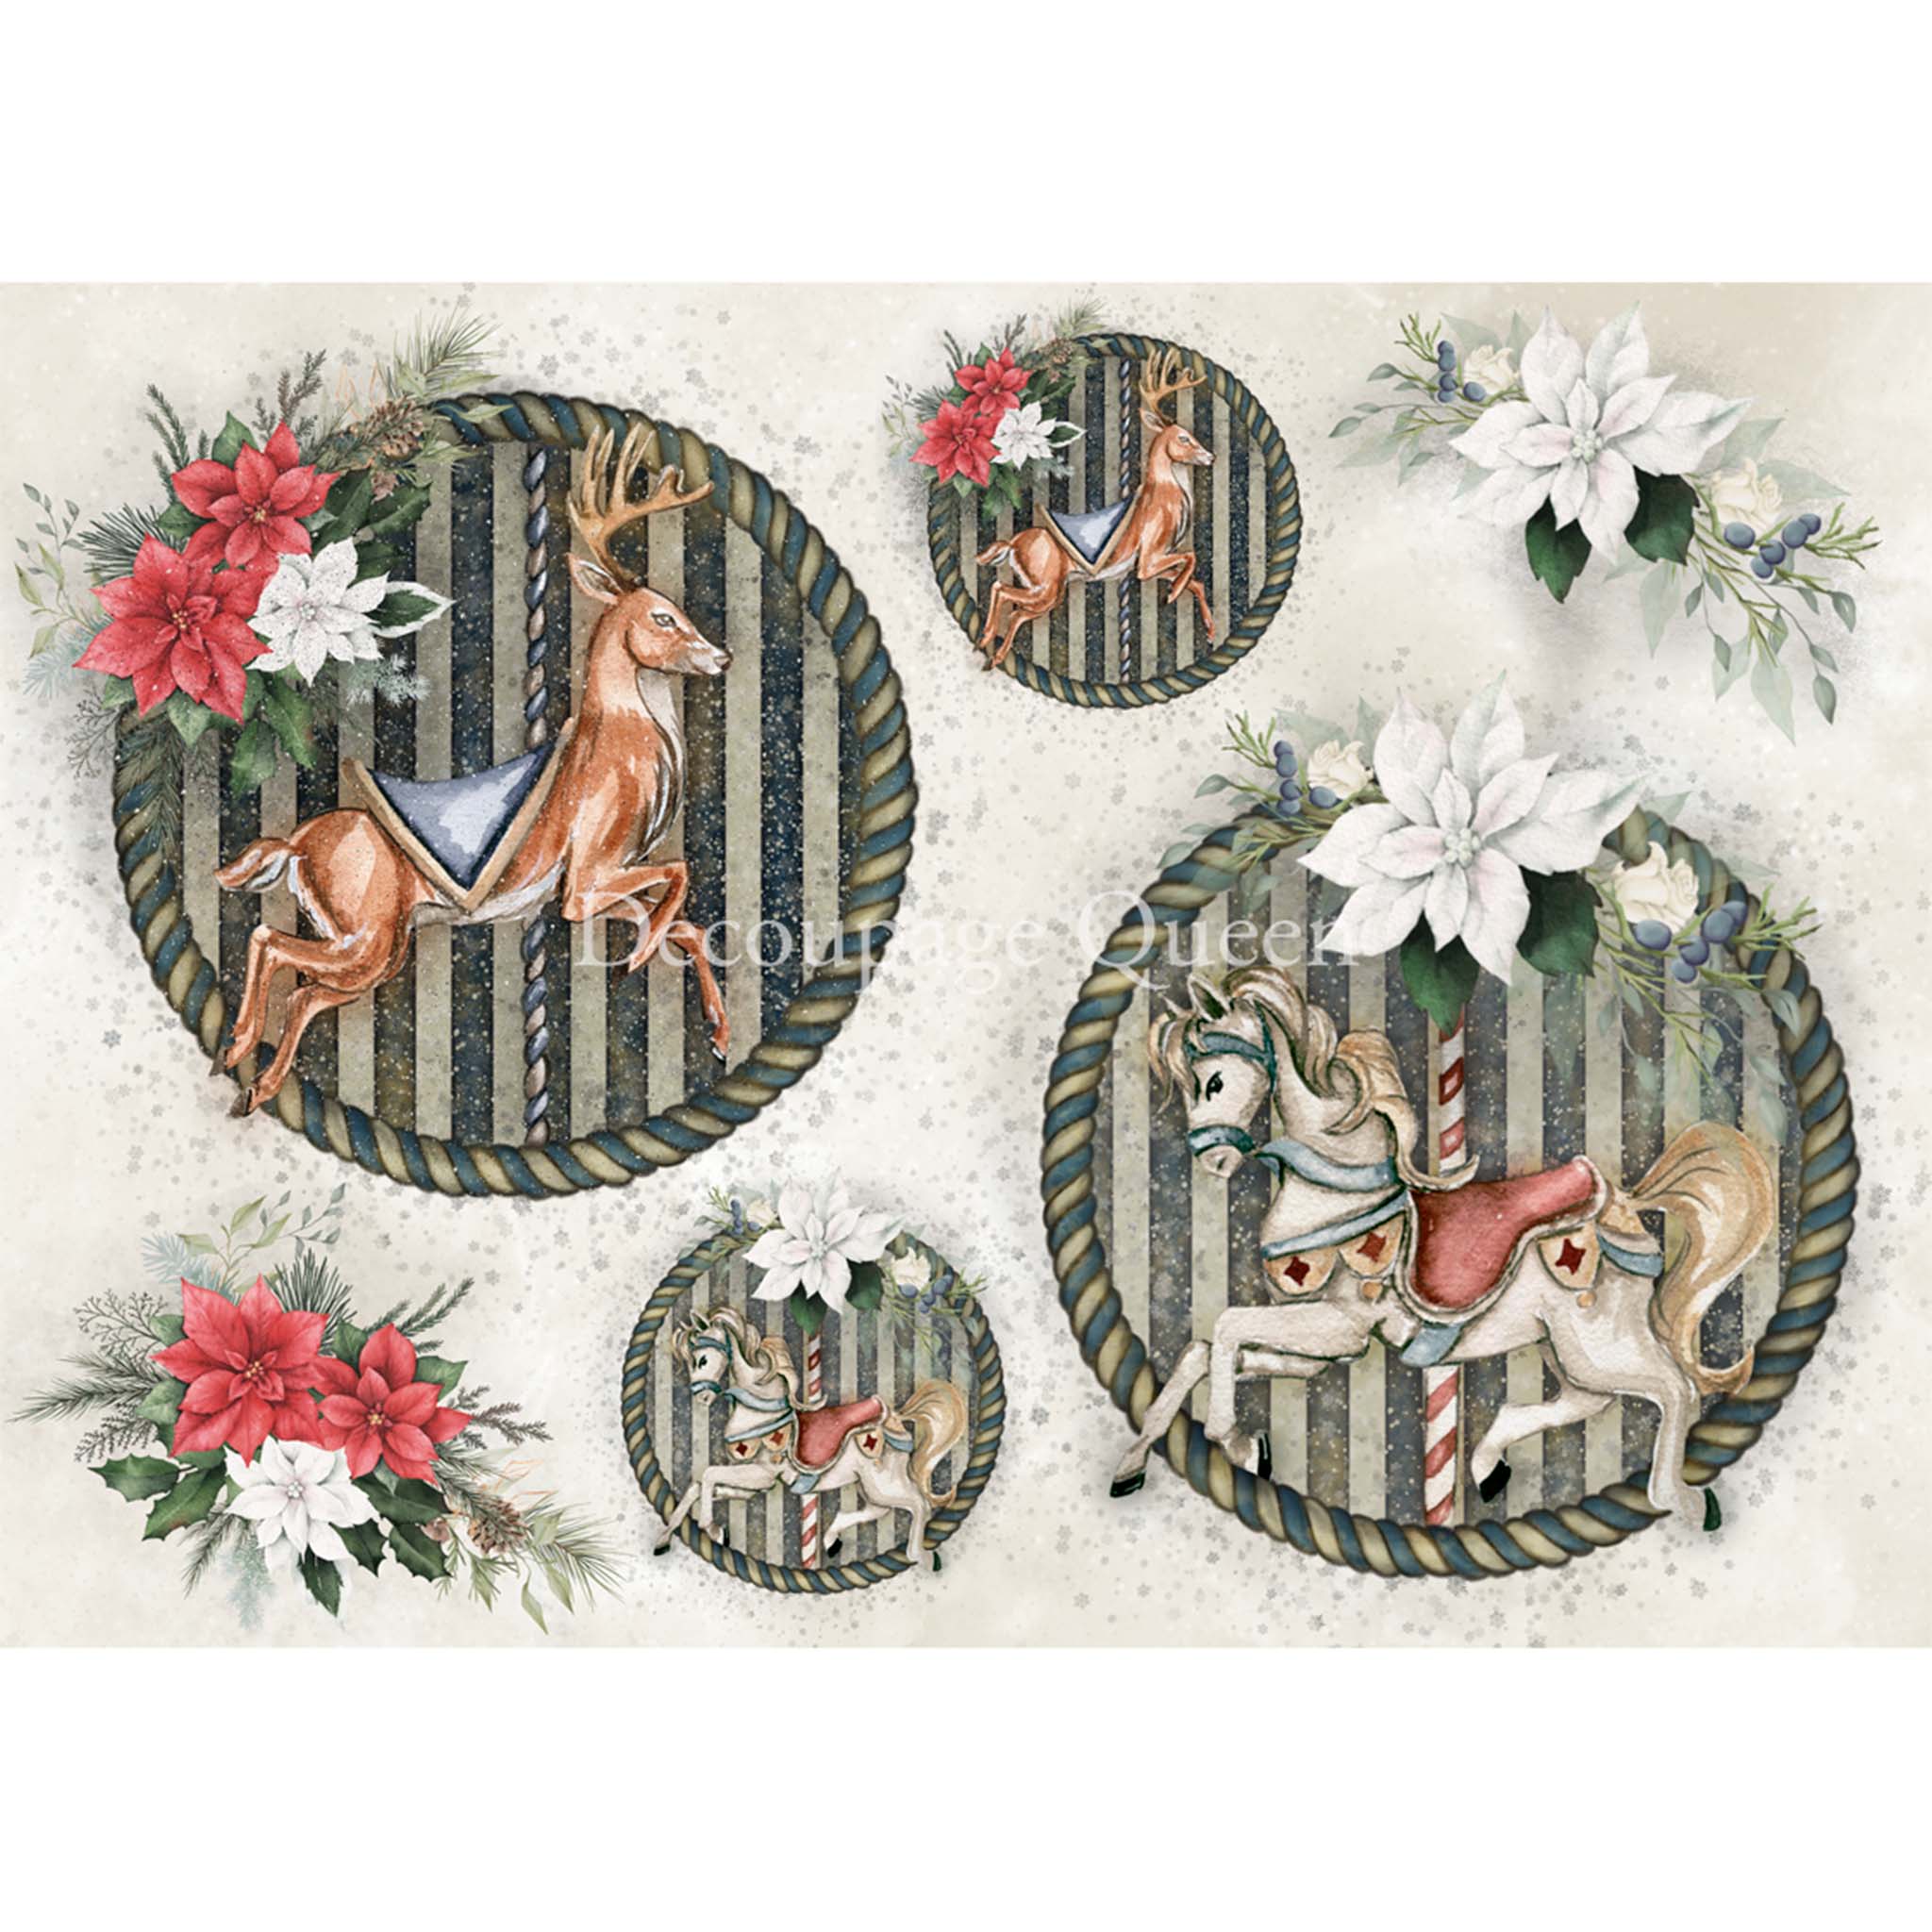 A3 rice paper that features varying sizes of Reindeer and carousel horses with red and white poinsettia flowers in round rope frames. 